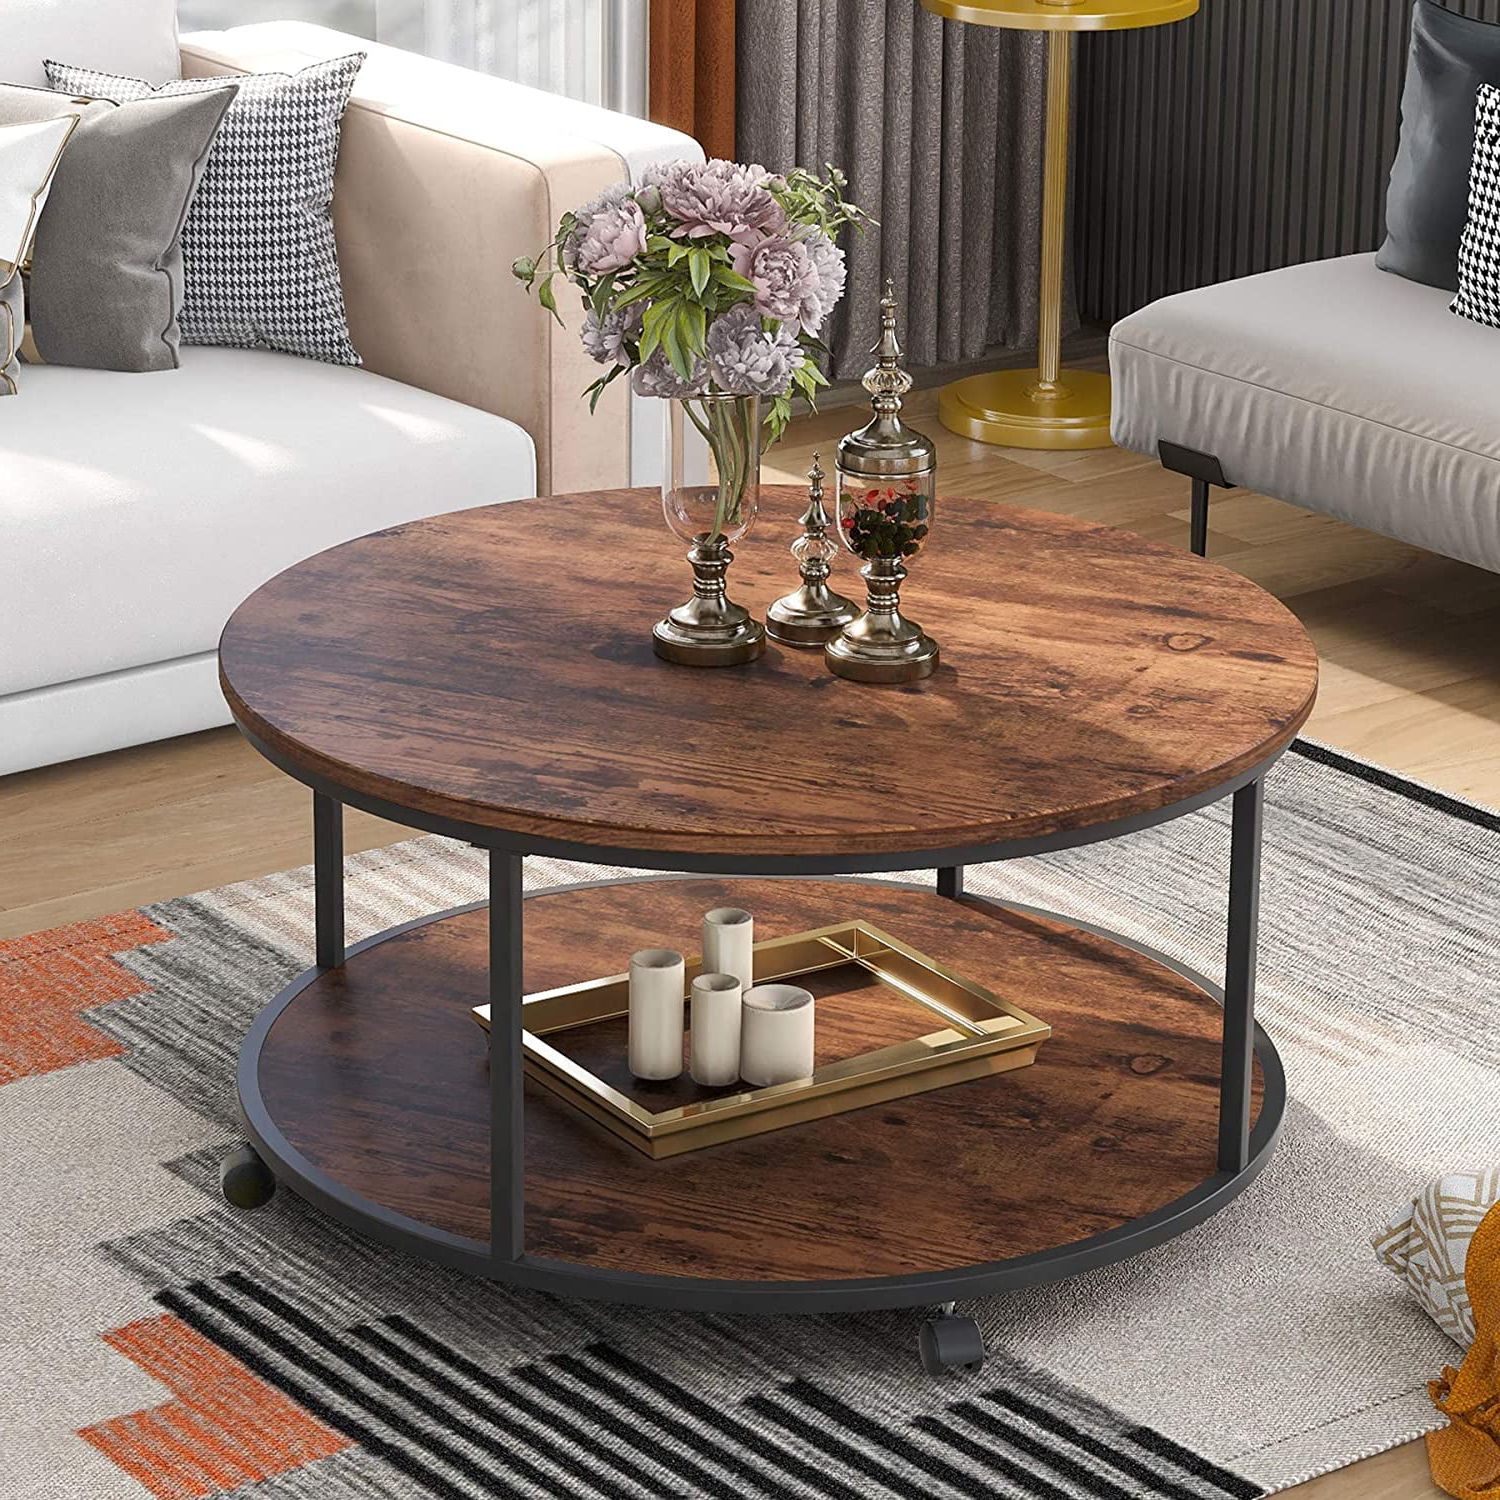 Wooden Coffee Table Designs For Living Room – Round Coffee Table Regarding Brown Rustic Coffee Tables (View 10 of 20)